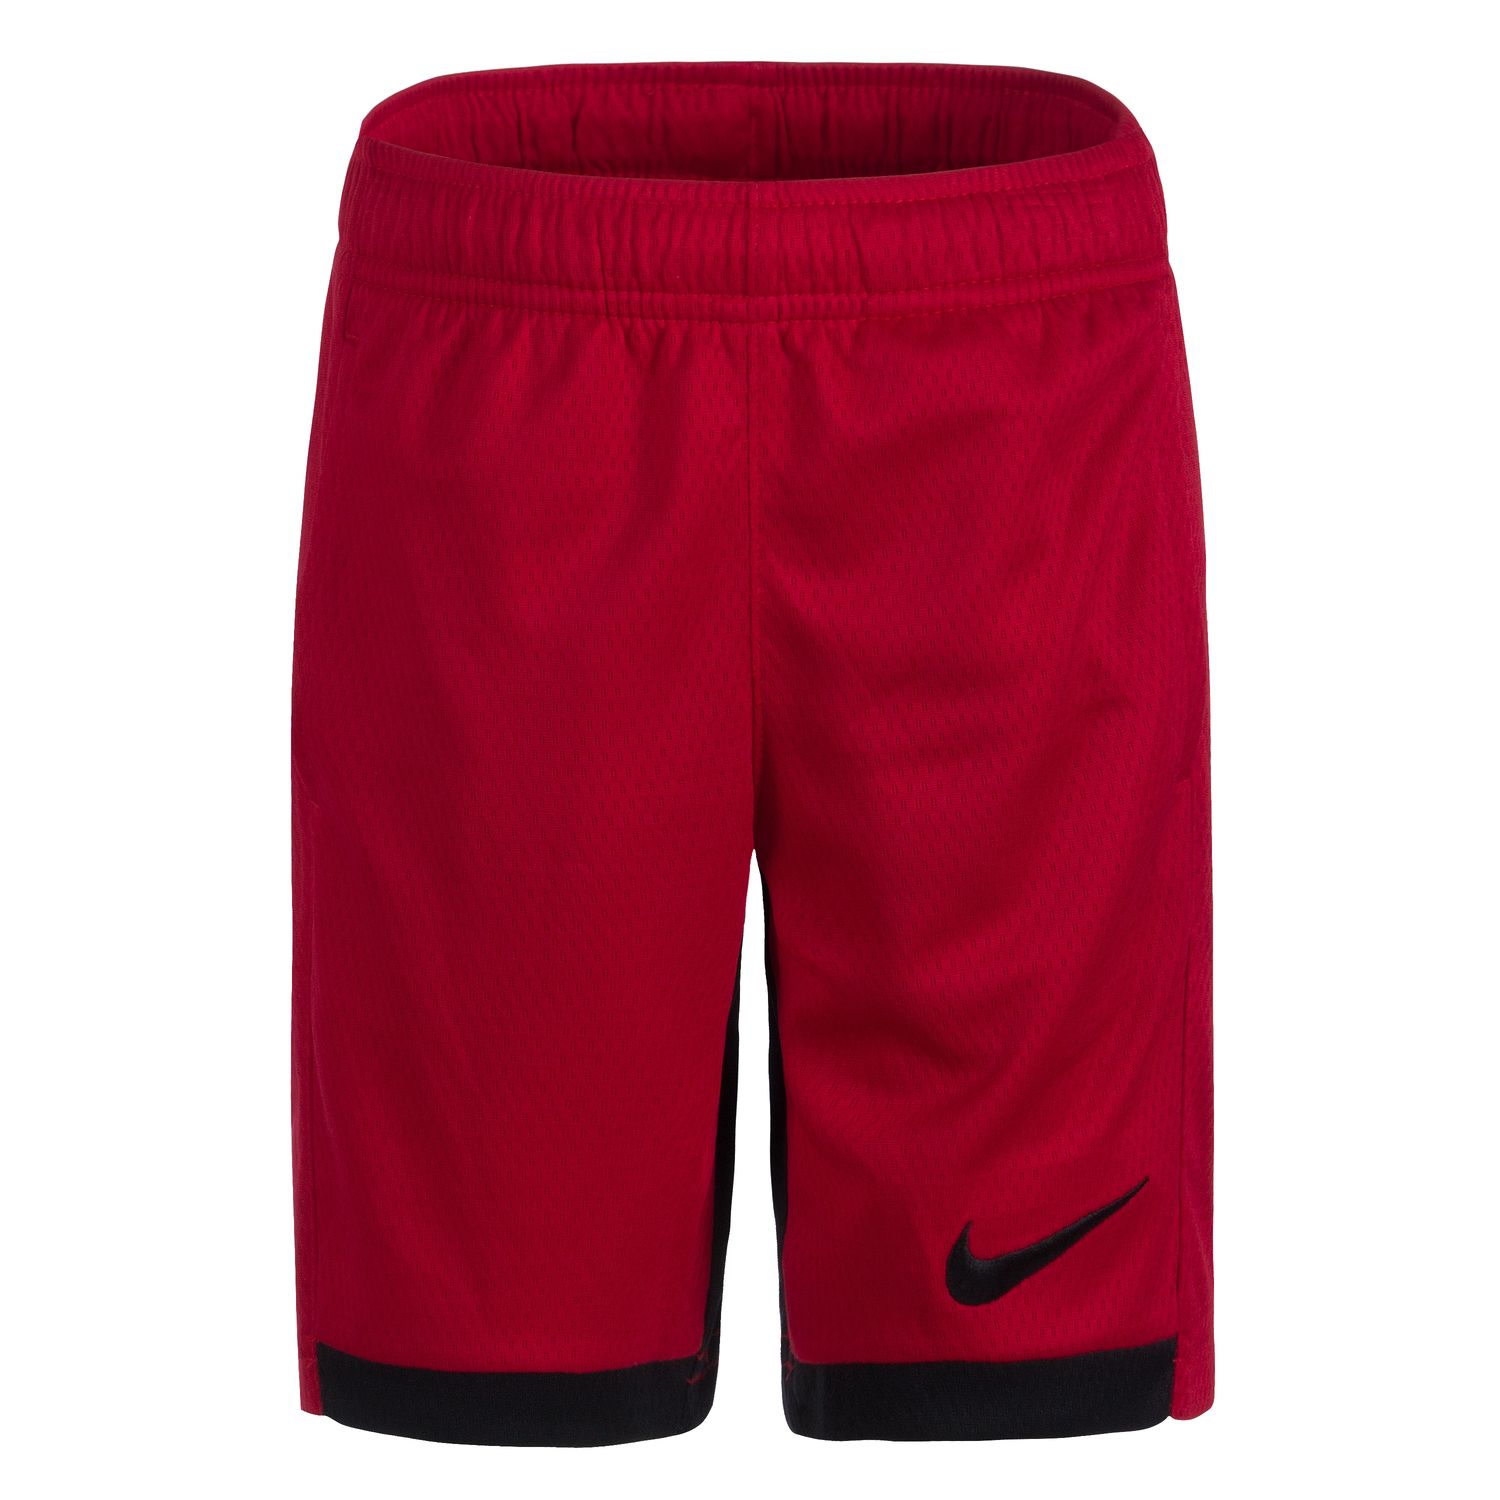 navy blue and red nike shorts